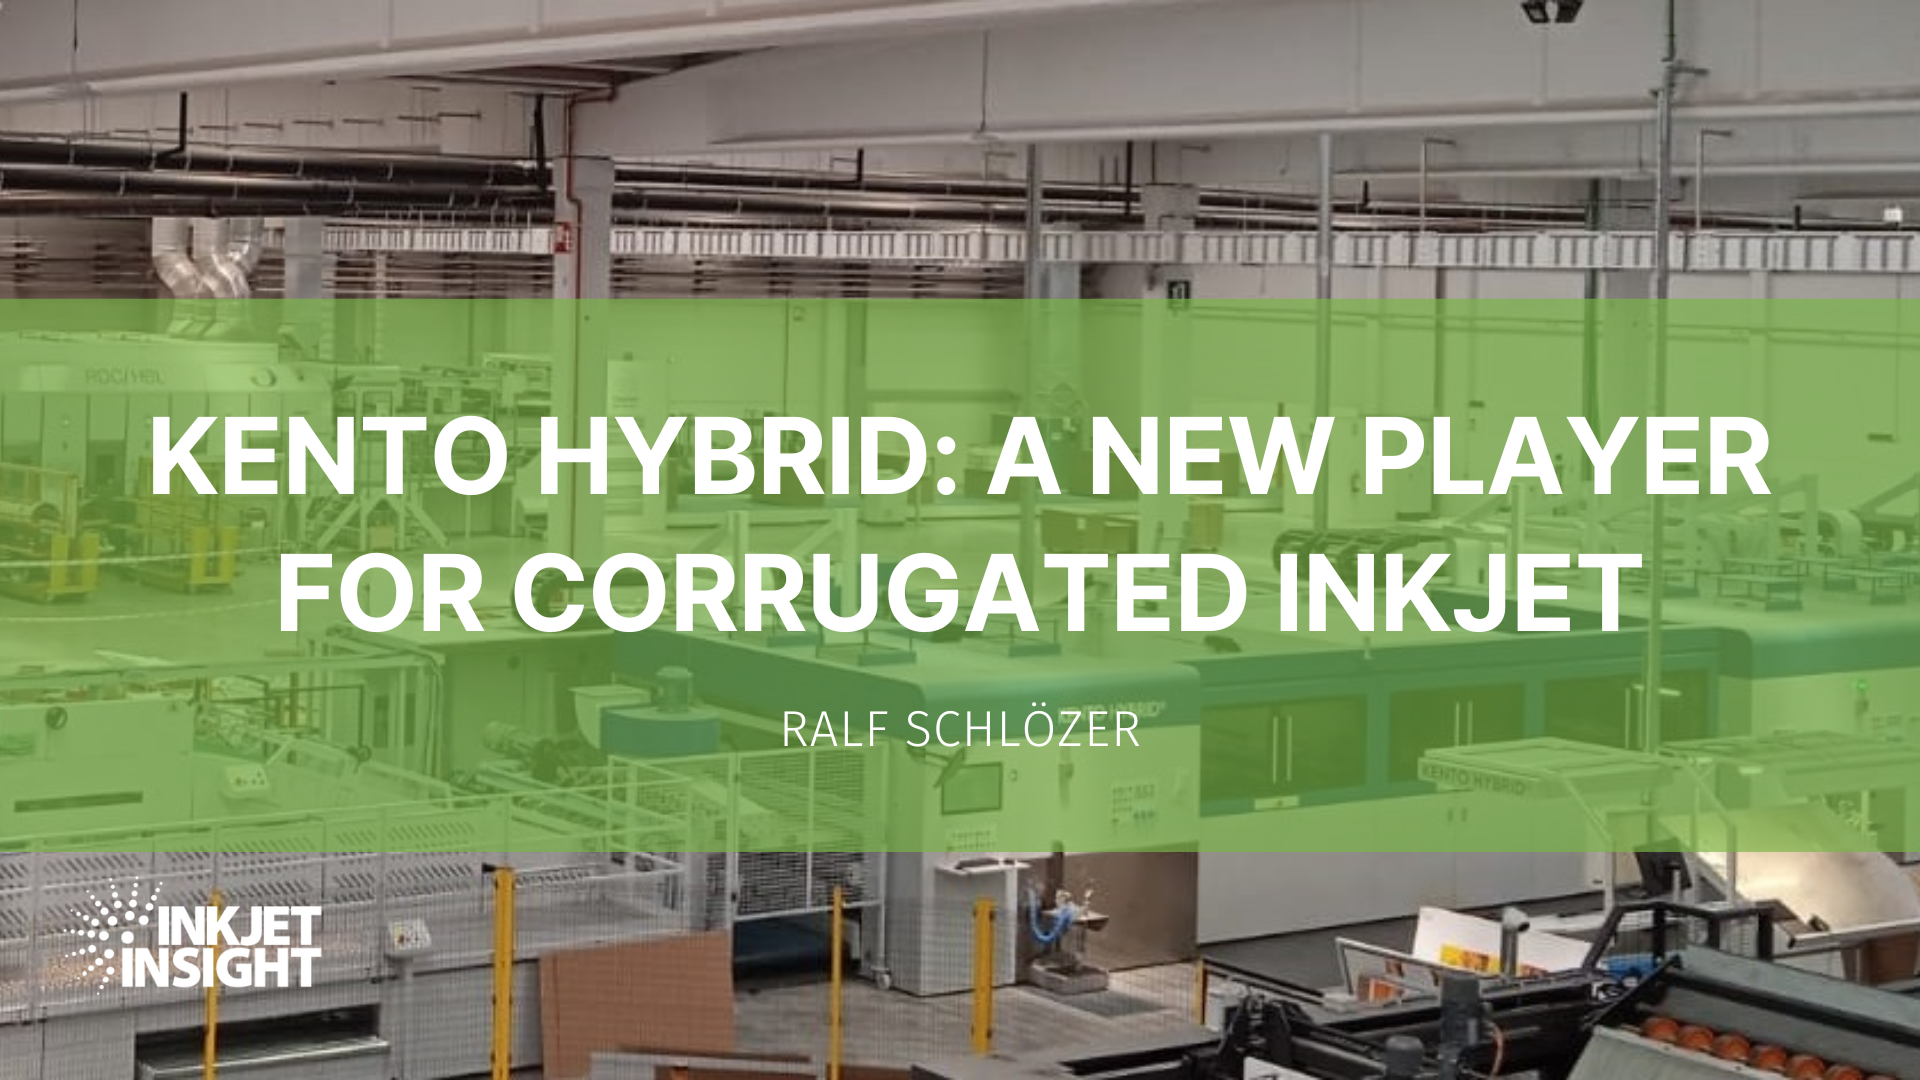 Featured image for “Kento Hybrid: a new player for corrugated inkjet”